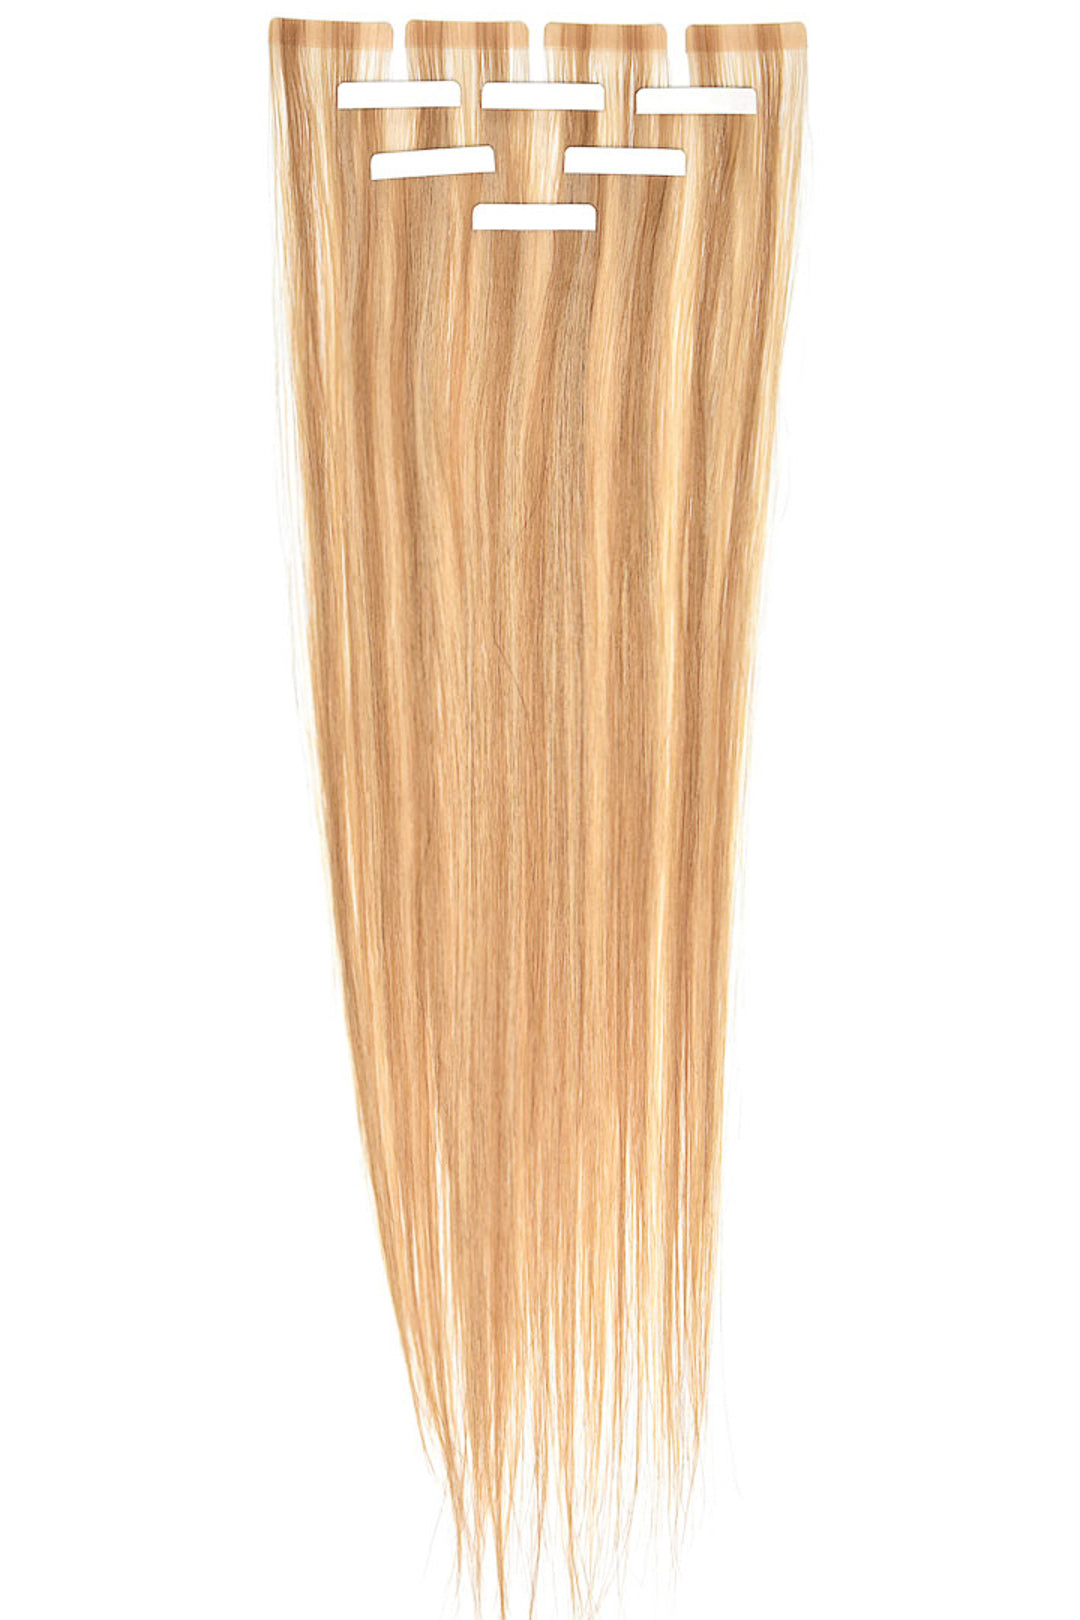 AVERA #10/16 Mixed Blonde Tape-In Hair Extension